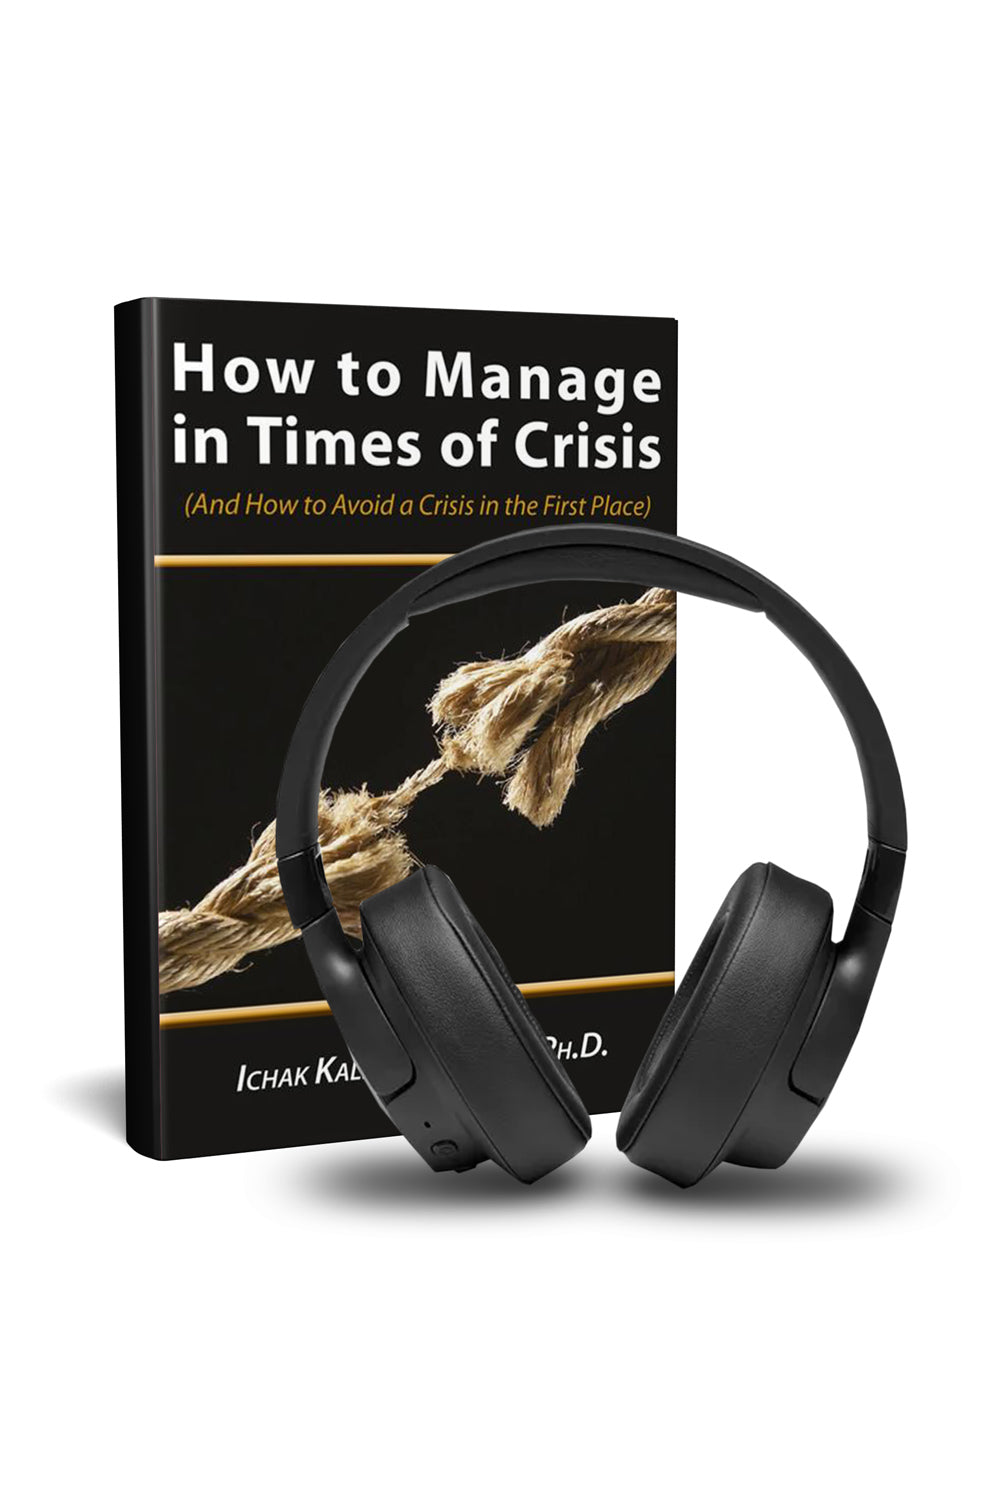 How to Manage in Times of Crisis (English) (Audio Book)